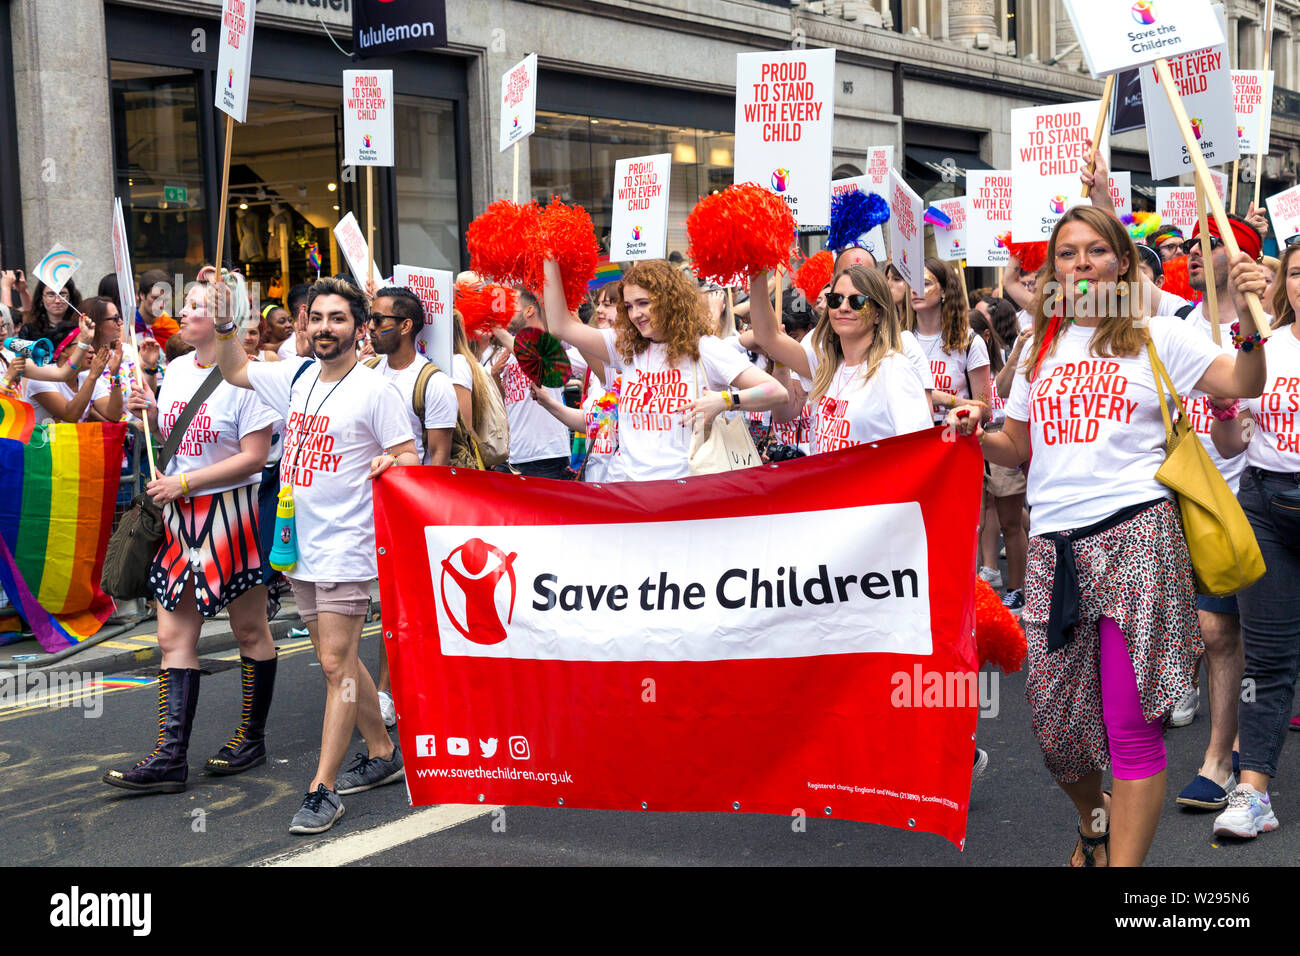 6 July 2019 - Save the Children at London Pride Parade, UK Stock Photo